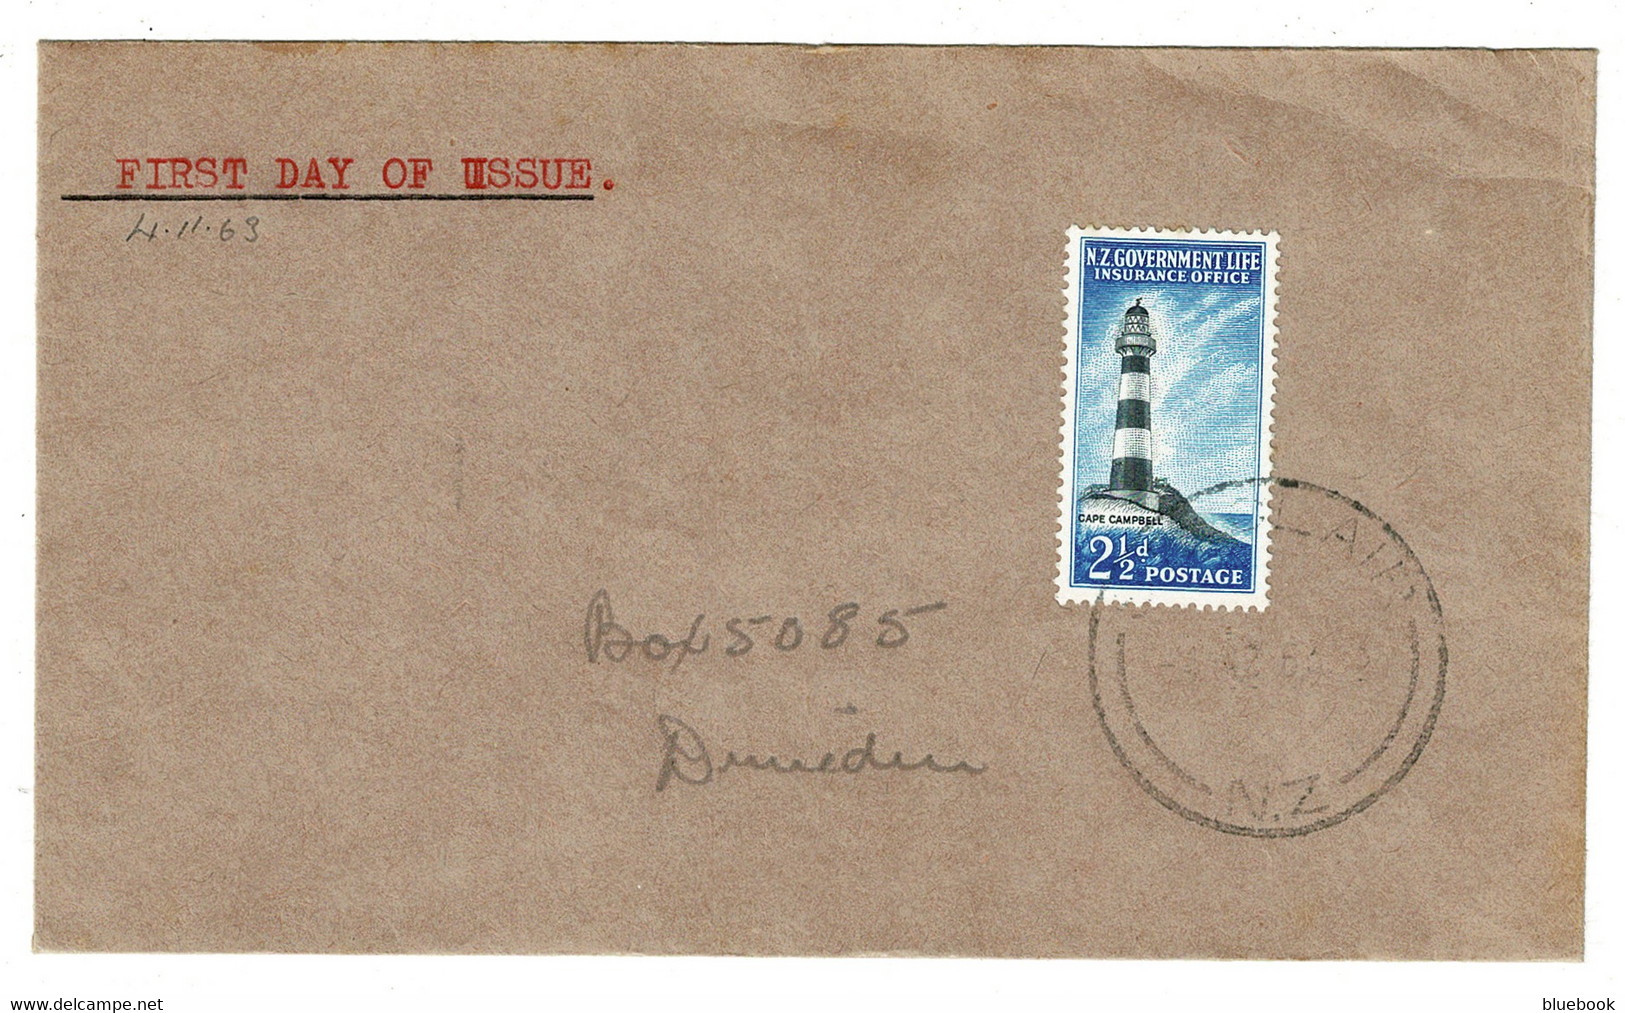 Ref 1553 -  1963 New Zealand FDC First Day Cover - Life Insurance Office SG L45 St Clair Pmk - Lighthouse Stamp - Briefe U. Dokumente